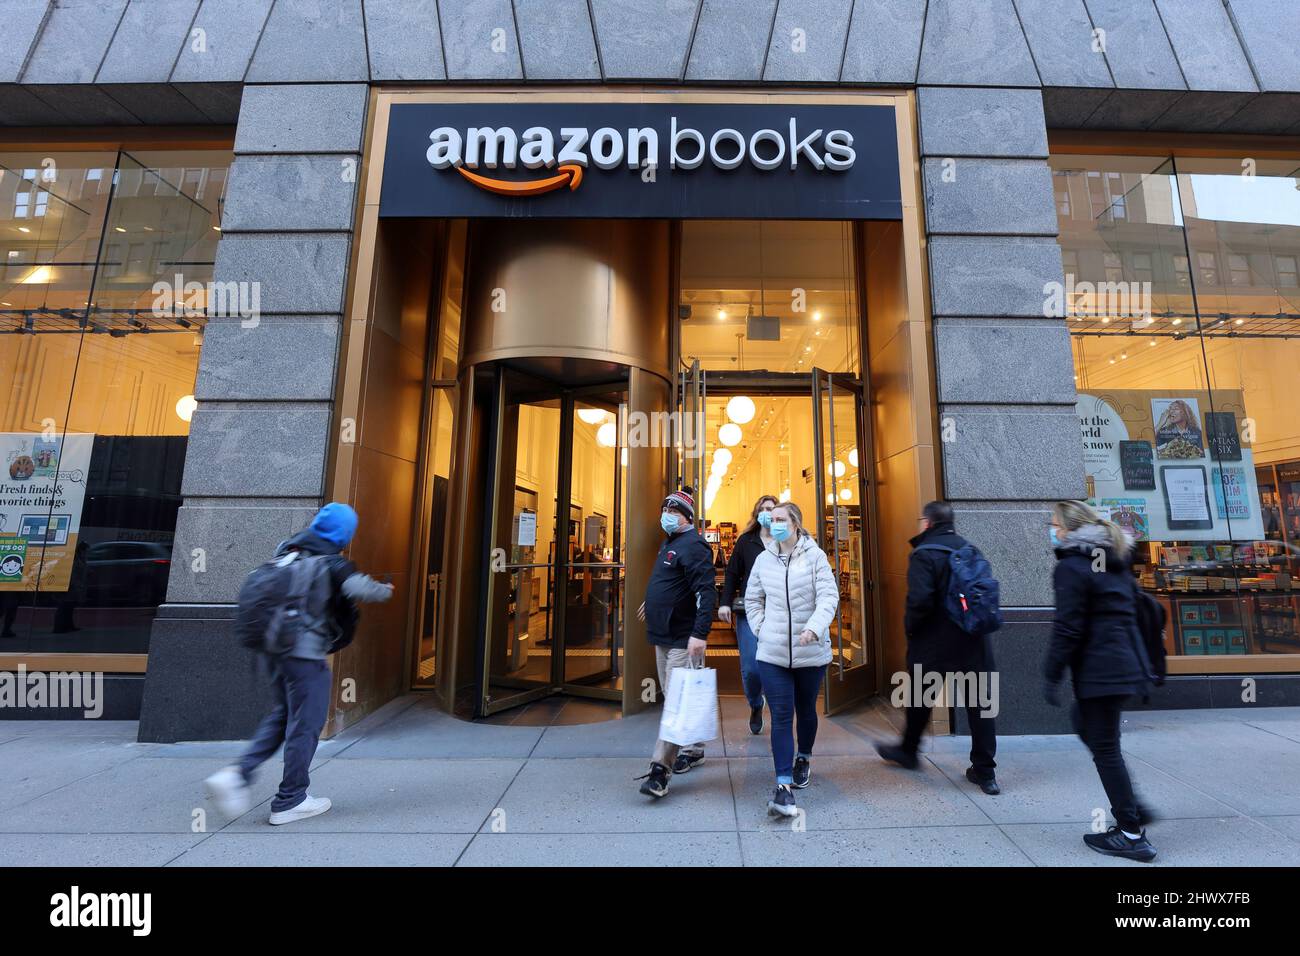 [historical storefront] Amazon Books, 7 W 34th St, New York, NYC storefront photo of a bookstore in Midtown Manhattan. March 3, 2022 Stock Photo